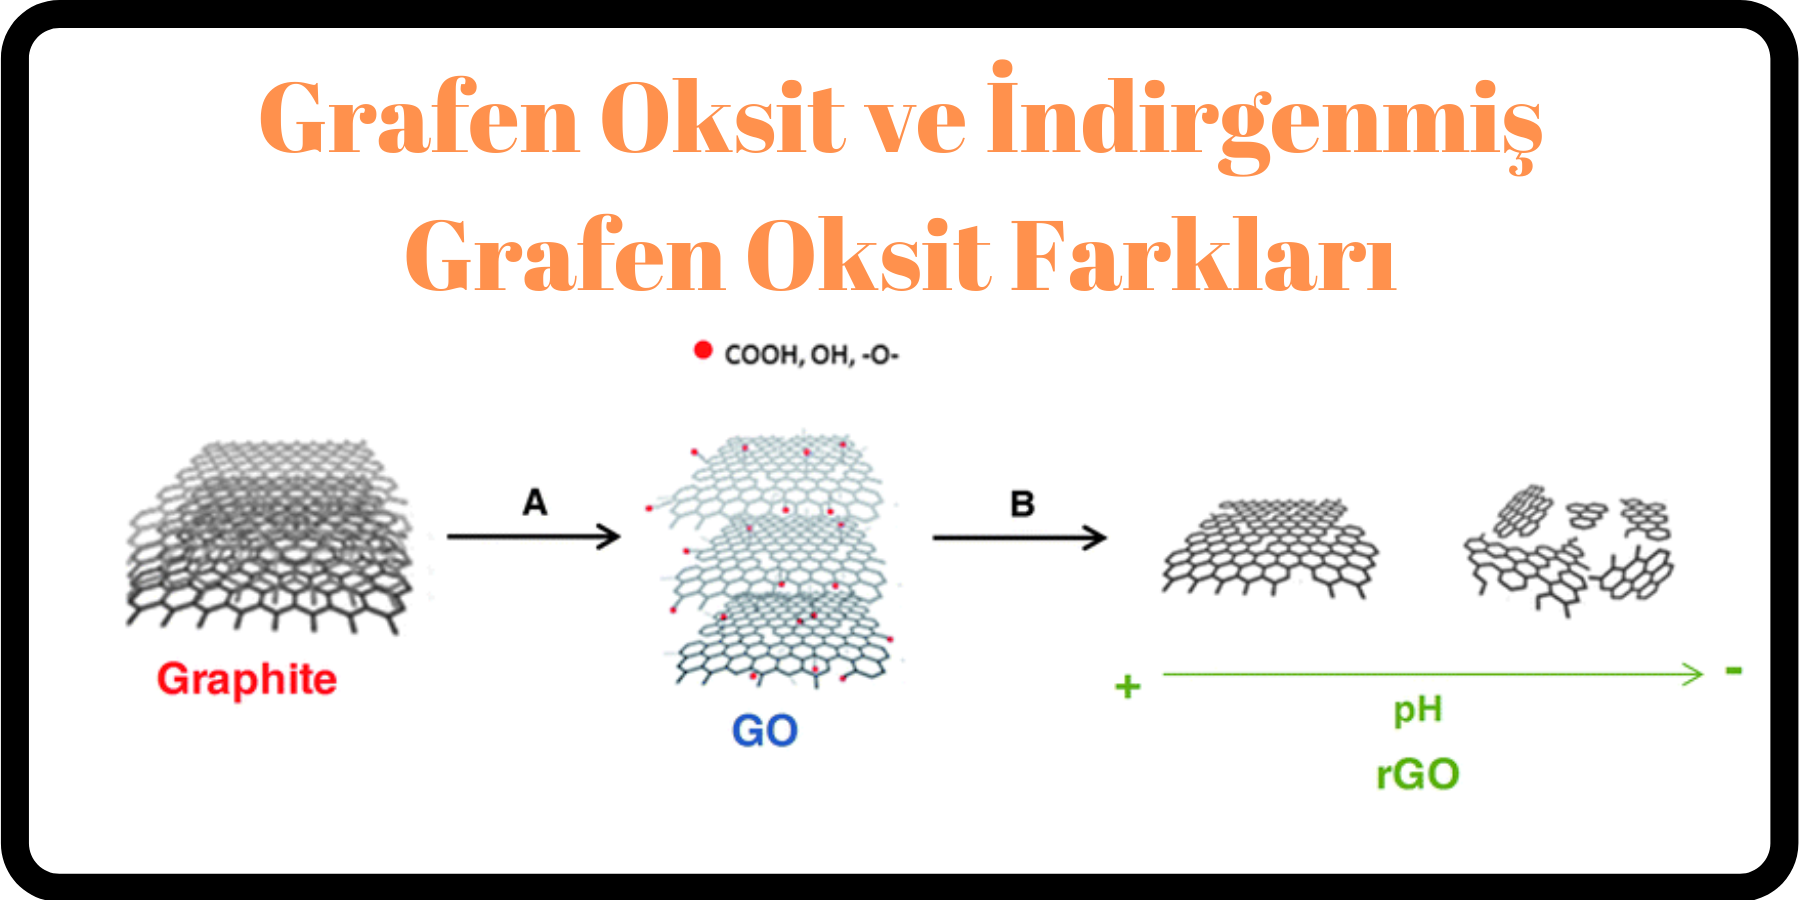 Difference Between Graphene Oxide and Reduced Graphene Oxide